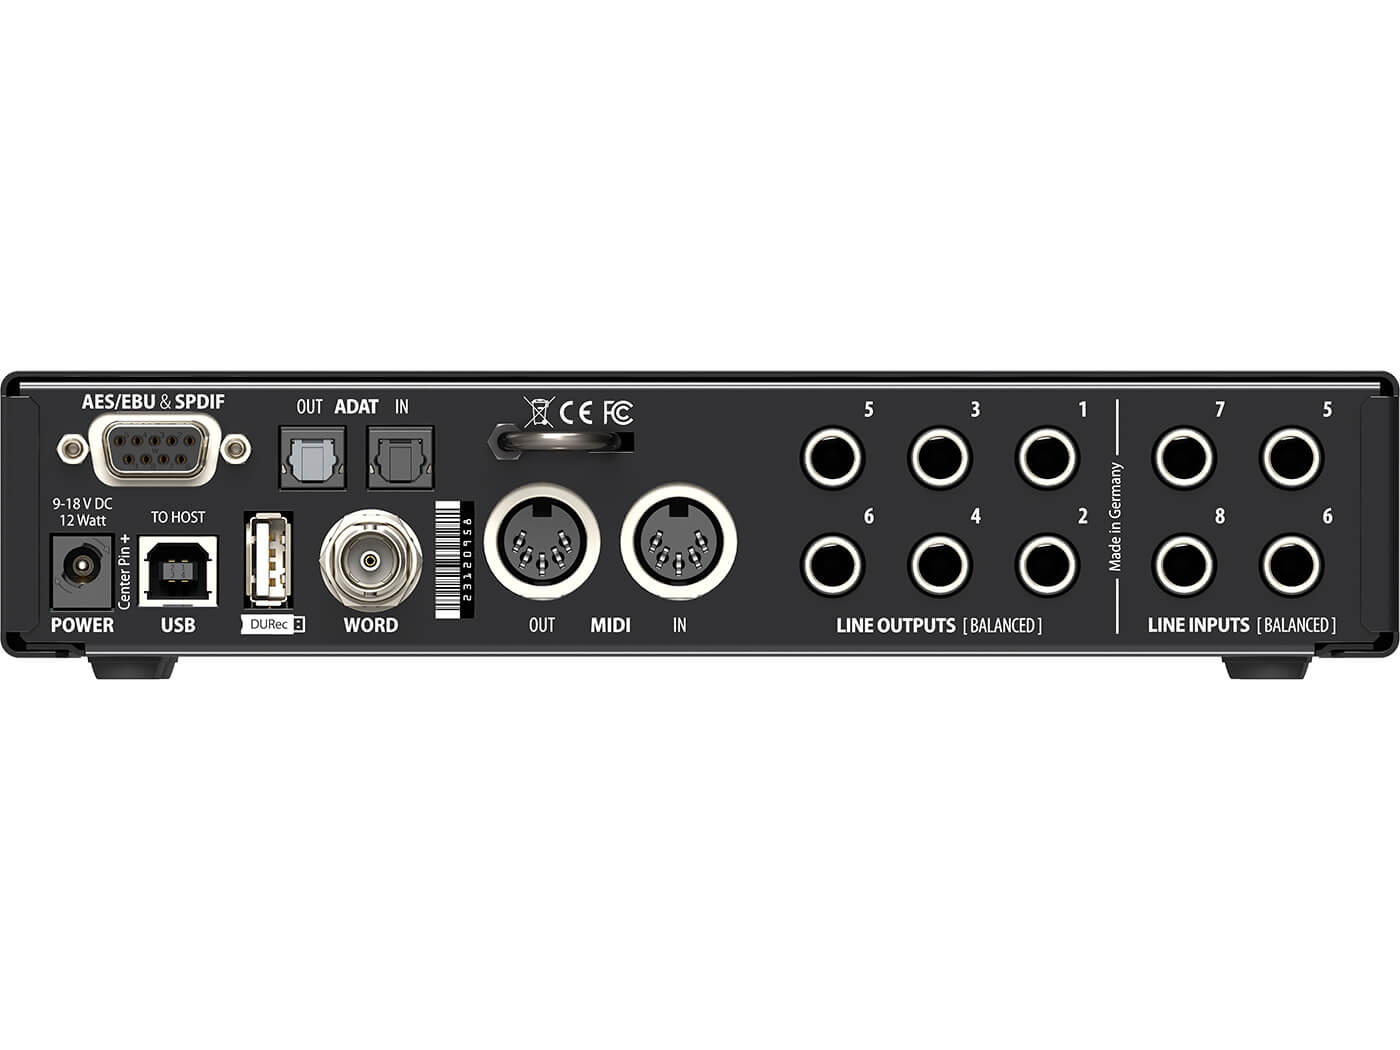 RME Fireface UCX II review: A compact, high quality and feature-rich audio  interface with a price tag to match | MusicTech